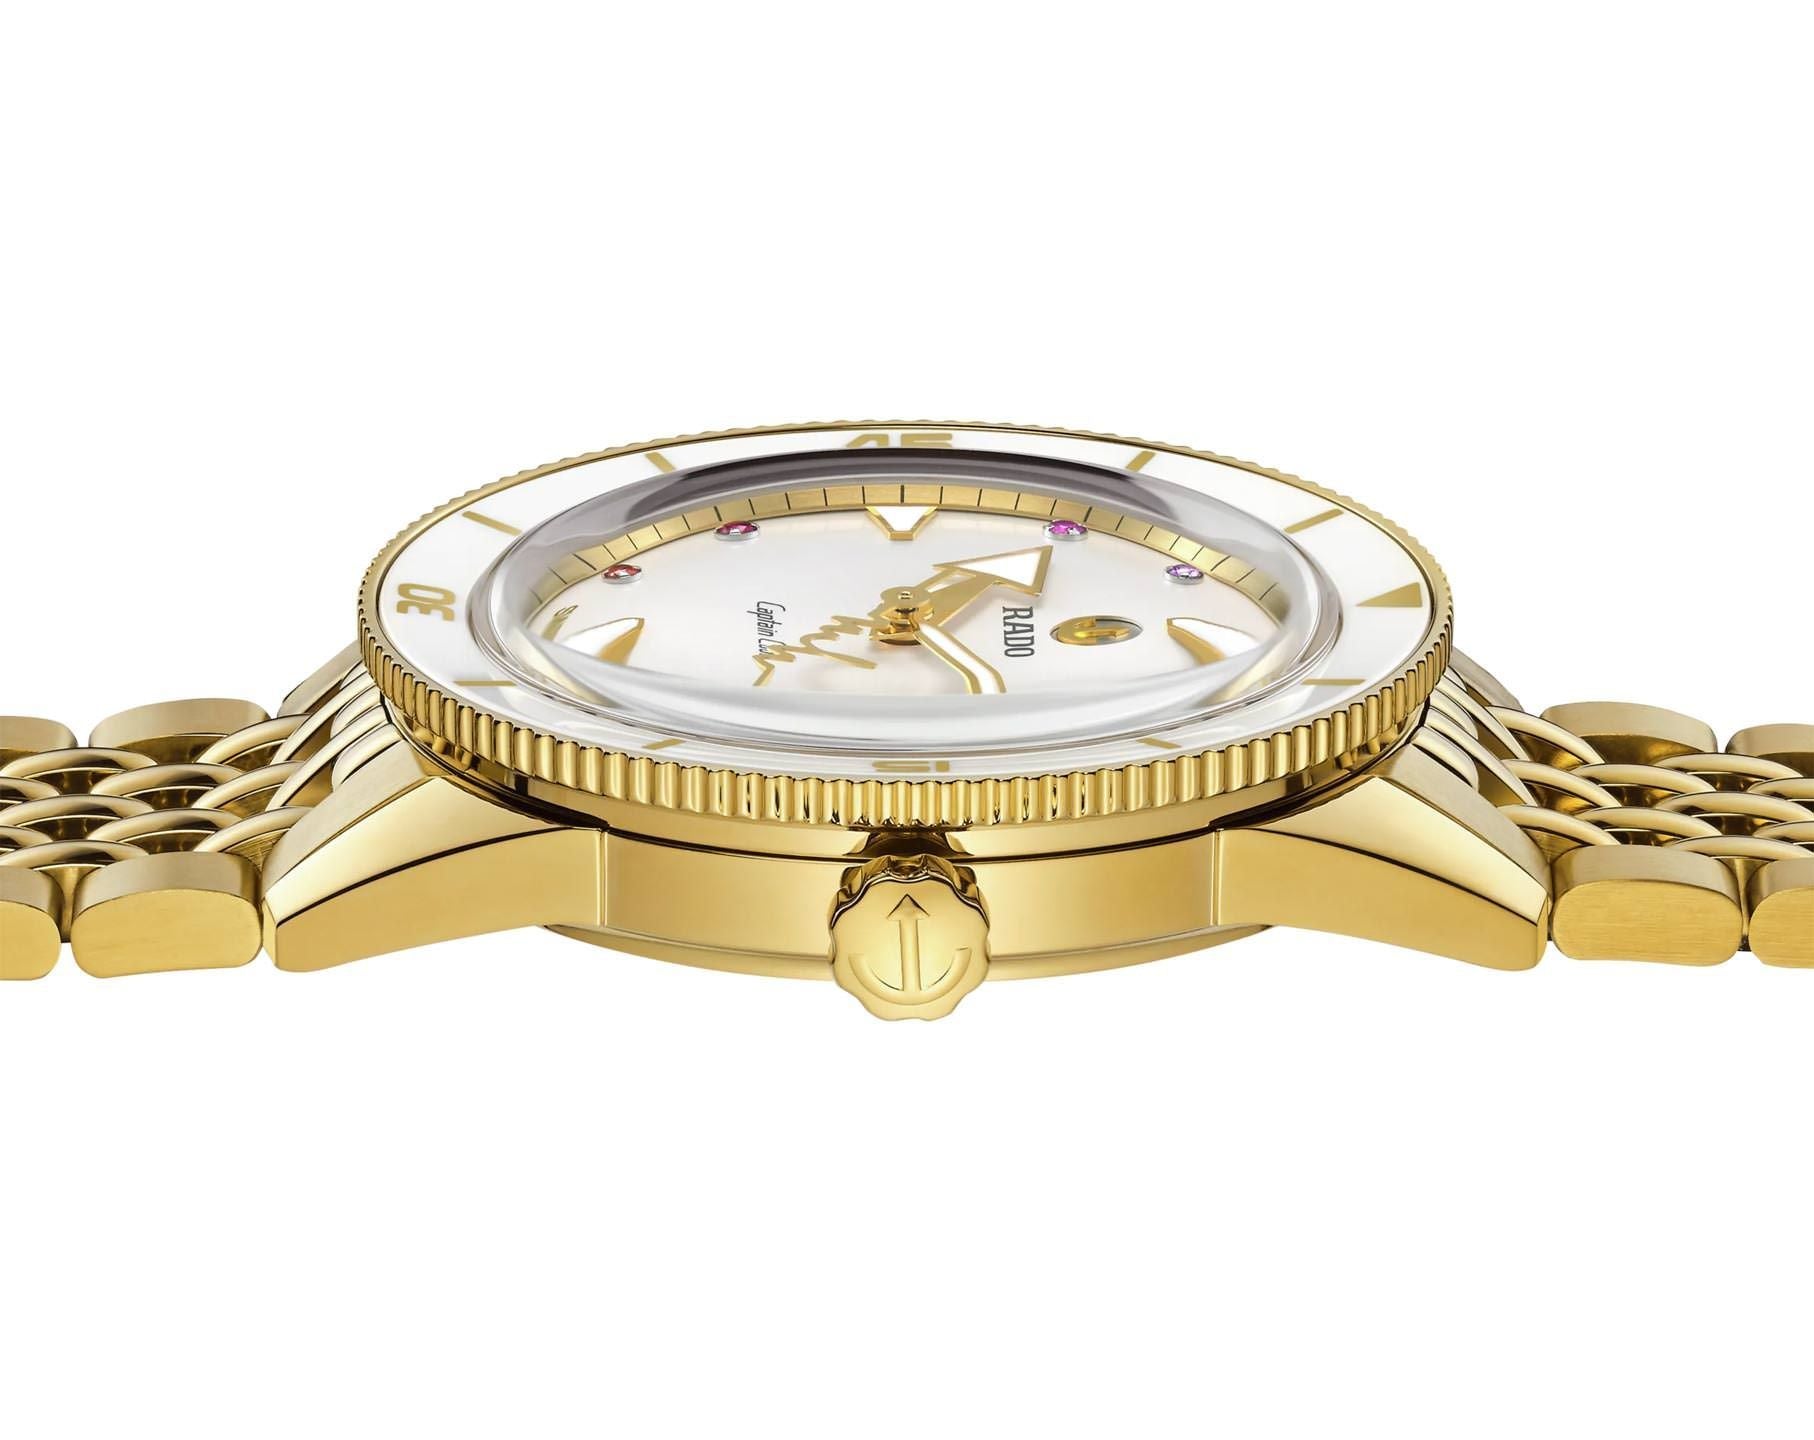 Rolex Captain Cook Premium Collection Watch » Buy online from